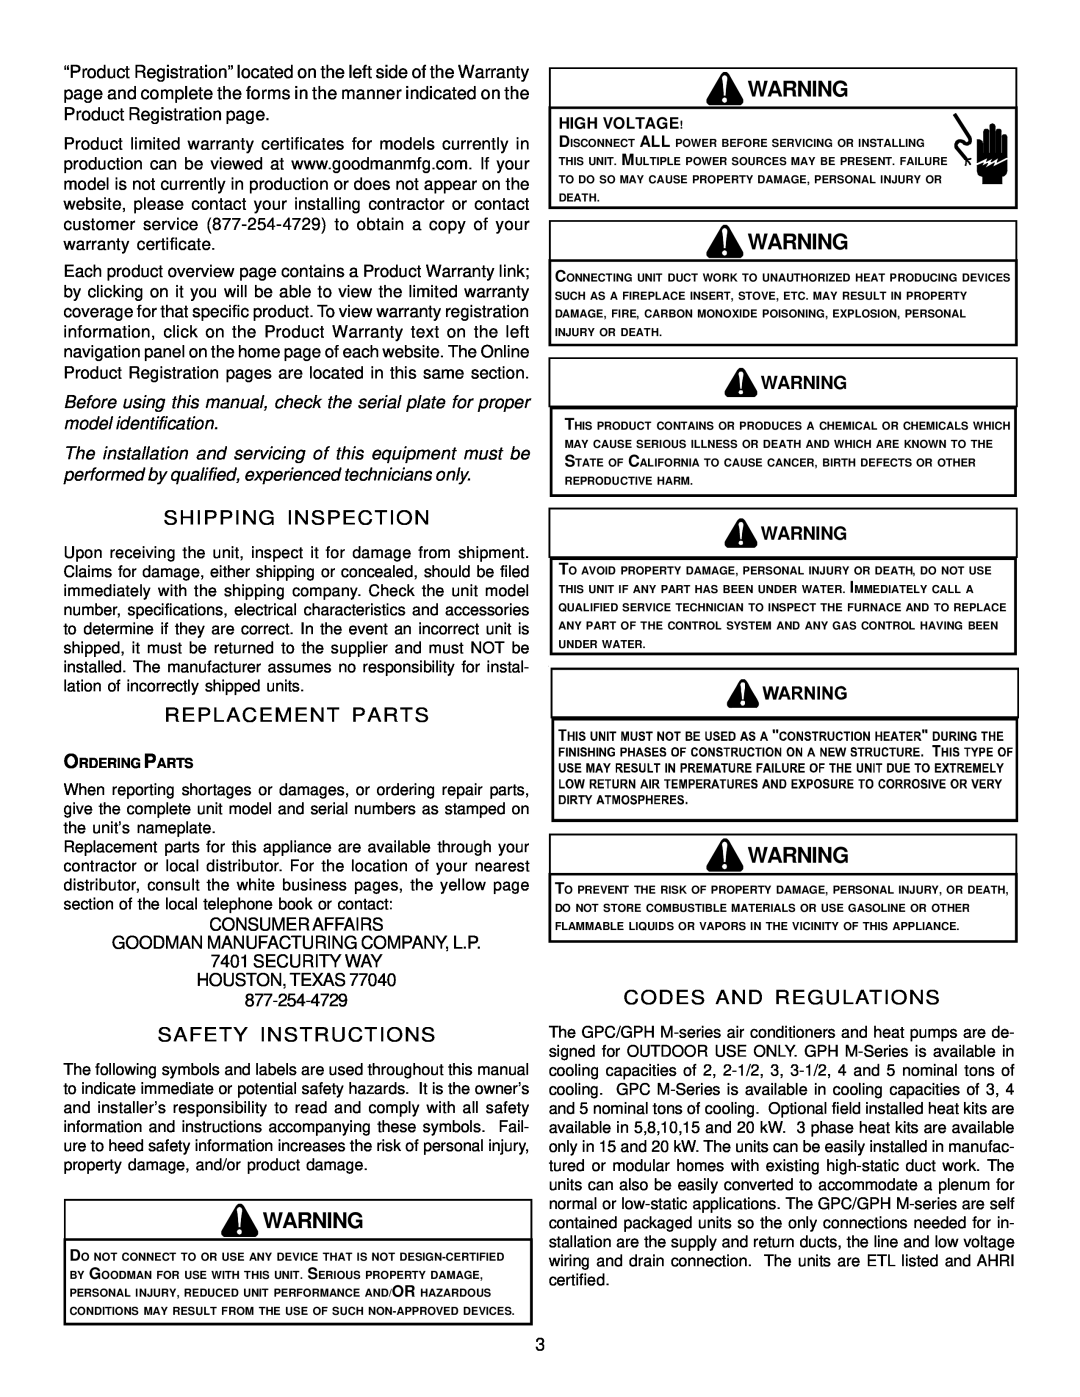 Goodman Mfg IO - 395 Shipping Inspection, Replacement Parts, Safety Instructions, Codes And Regulations, Consumer Affairs 